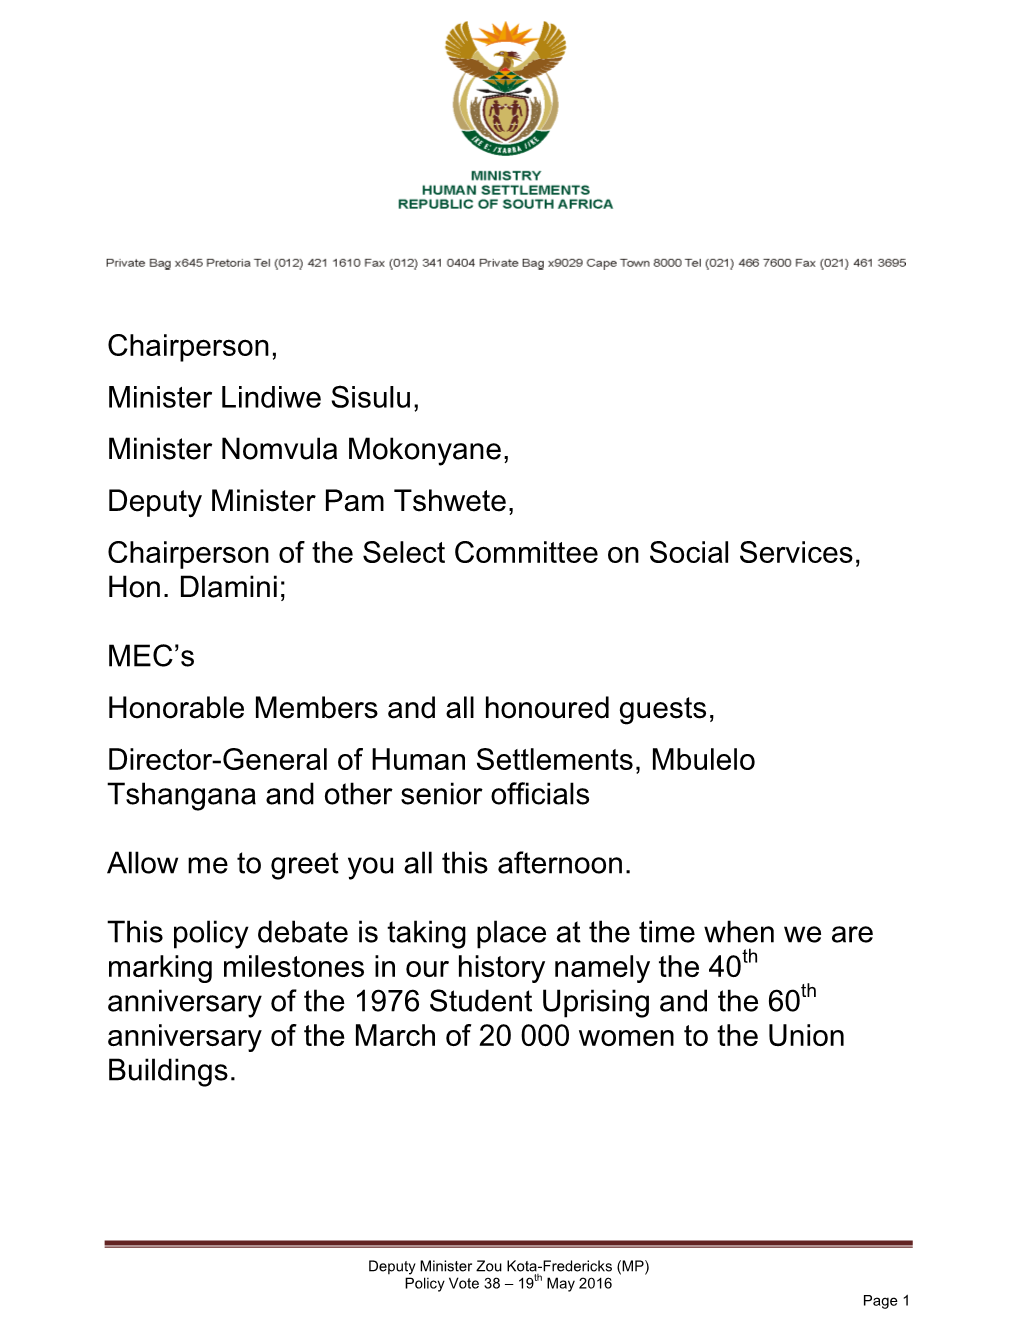 Chairperson, Minister Lindiwe Sisulu, Minister Nomvula Mokonyane, Deputy Minister Pam Tshwete, Chairperson of the Select Committee on Social Services, Hon